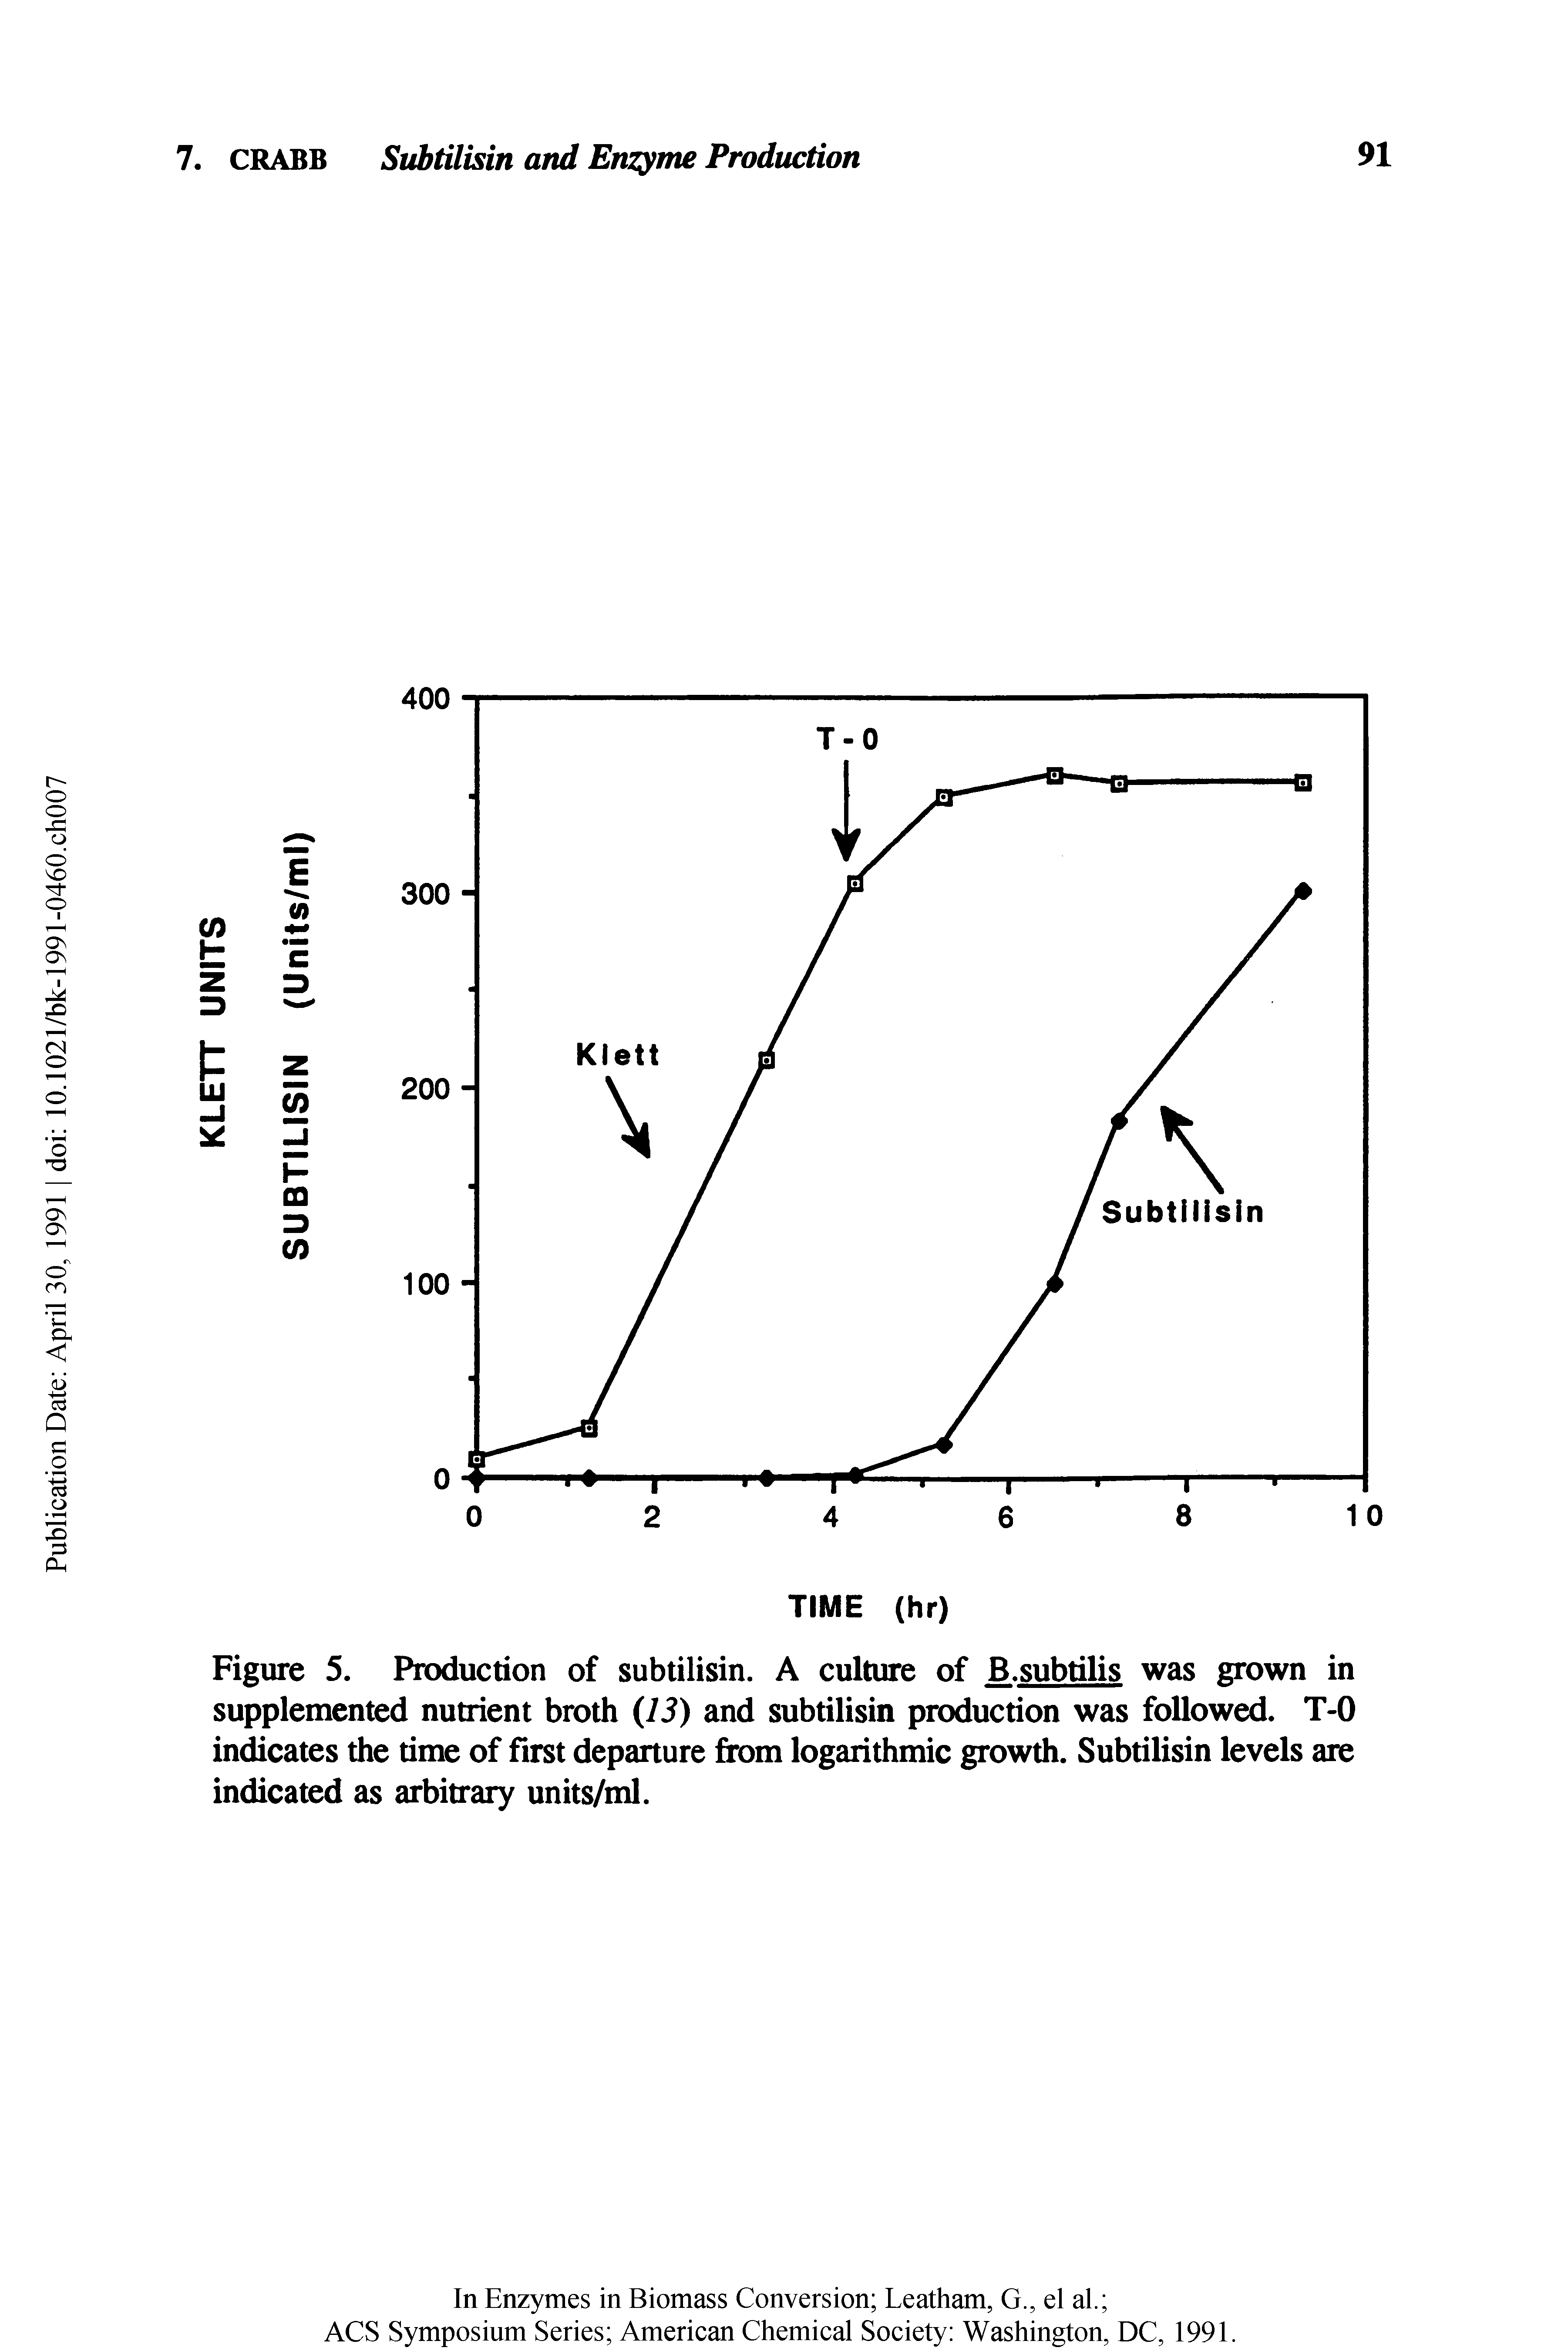 Figure 5. Production of subtilisin. A culture of B.subtilis was grown in supplemented nutrient broth (75) and subtilisin production was followed. T-0 indicates the time of first departure from logarithmic growth. Subtilisin levels are indicated as arbitrary units/ml.